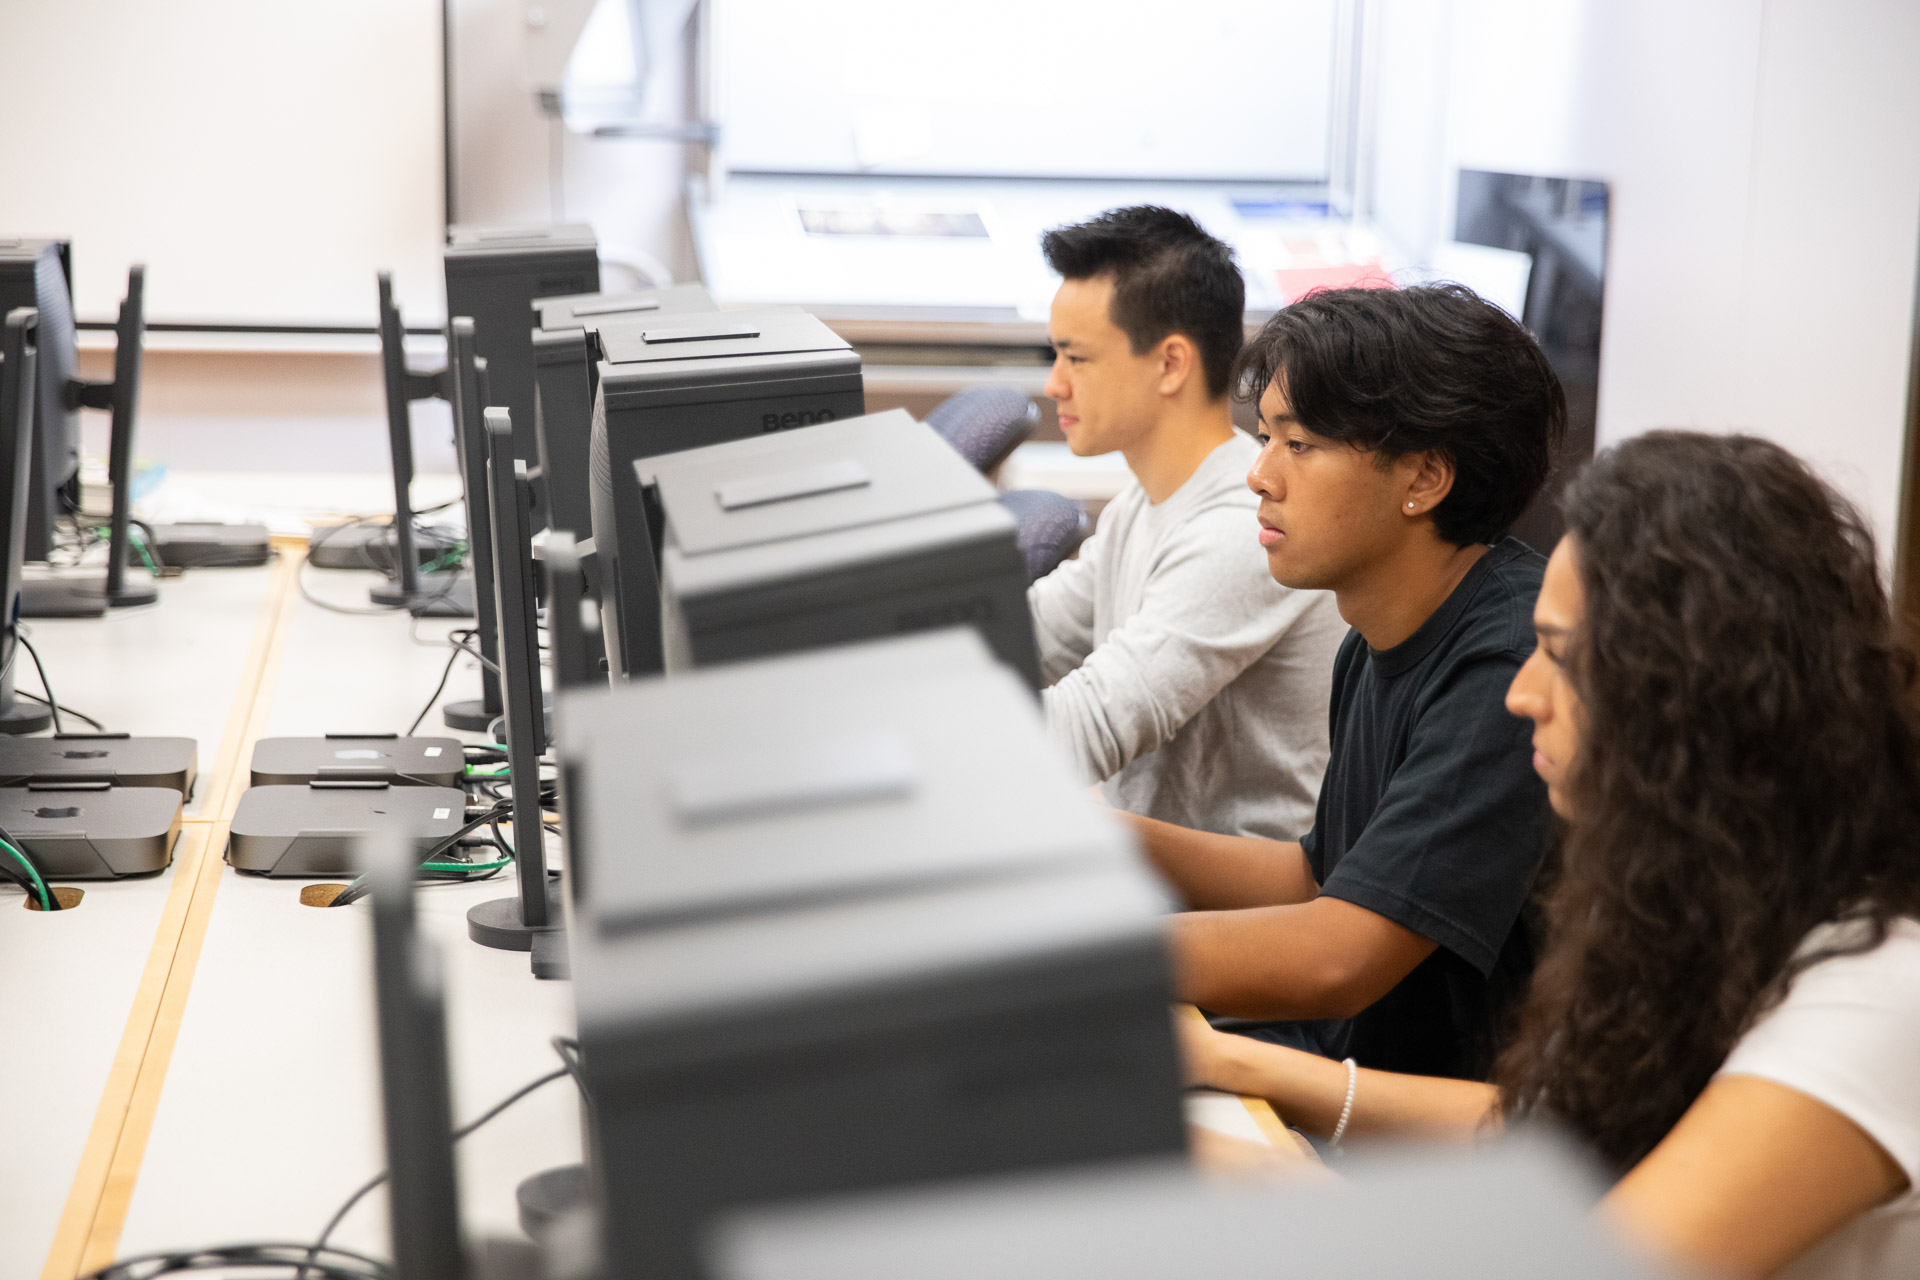 Students in the lab working on computers